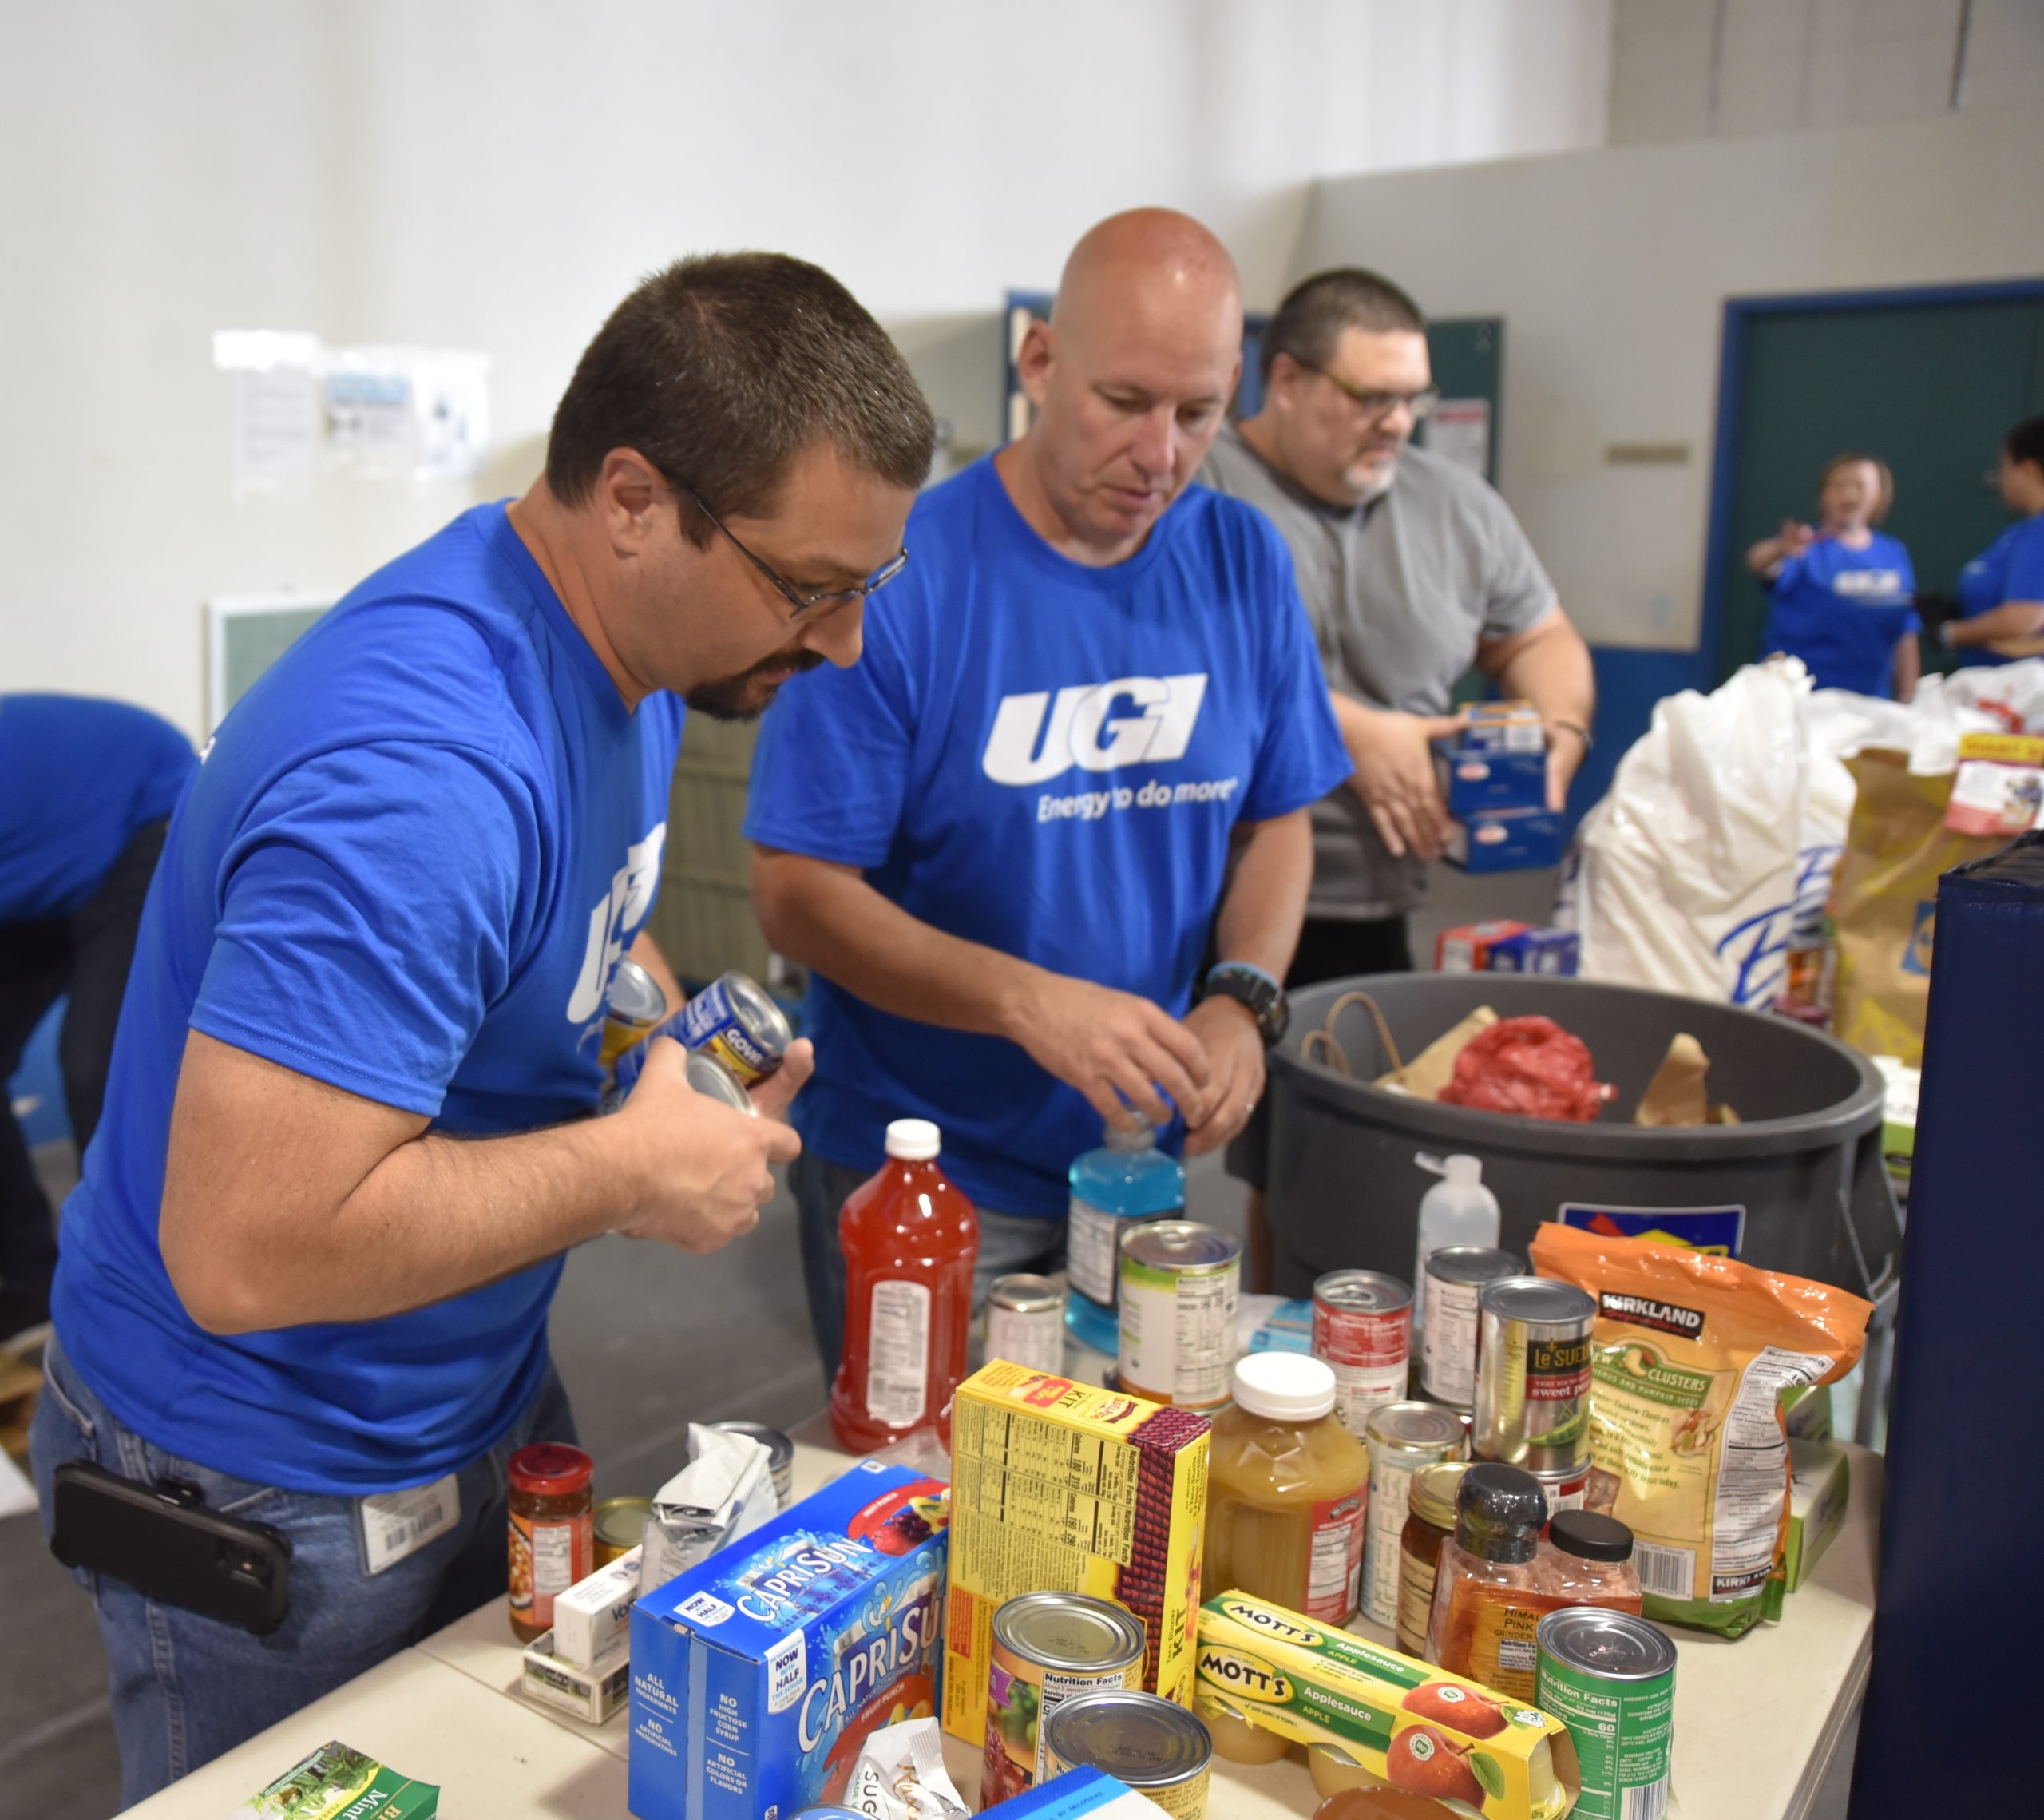 UGI employees package food donations.